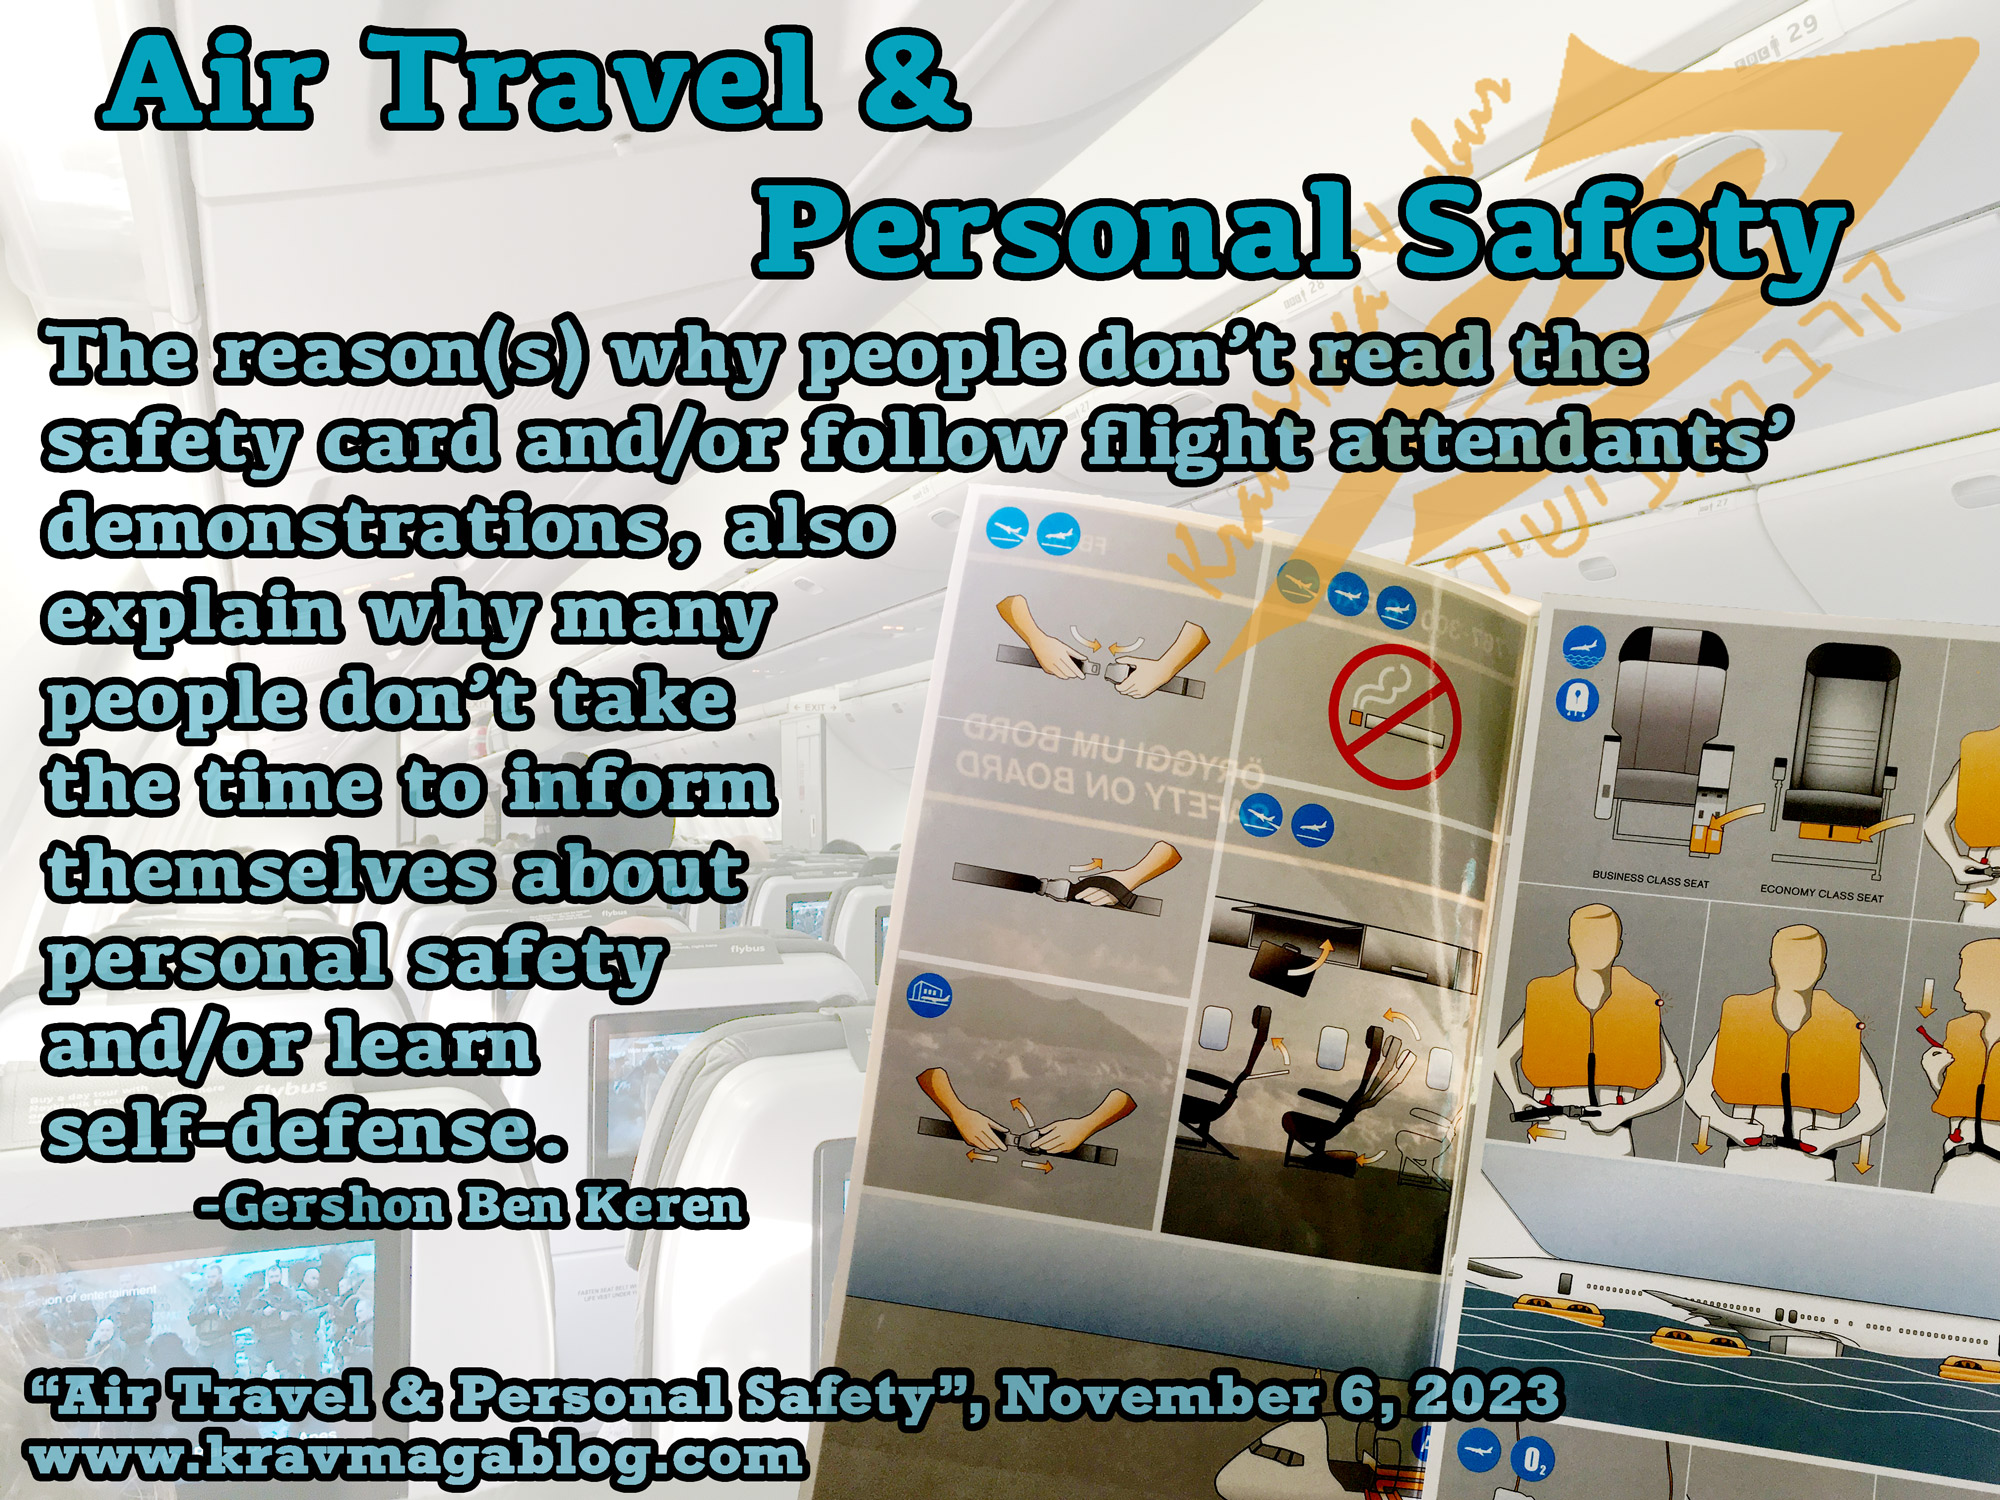 Air Travel & Personal Safety